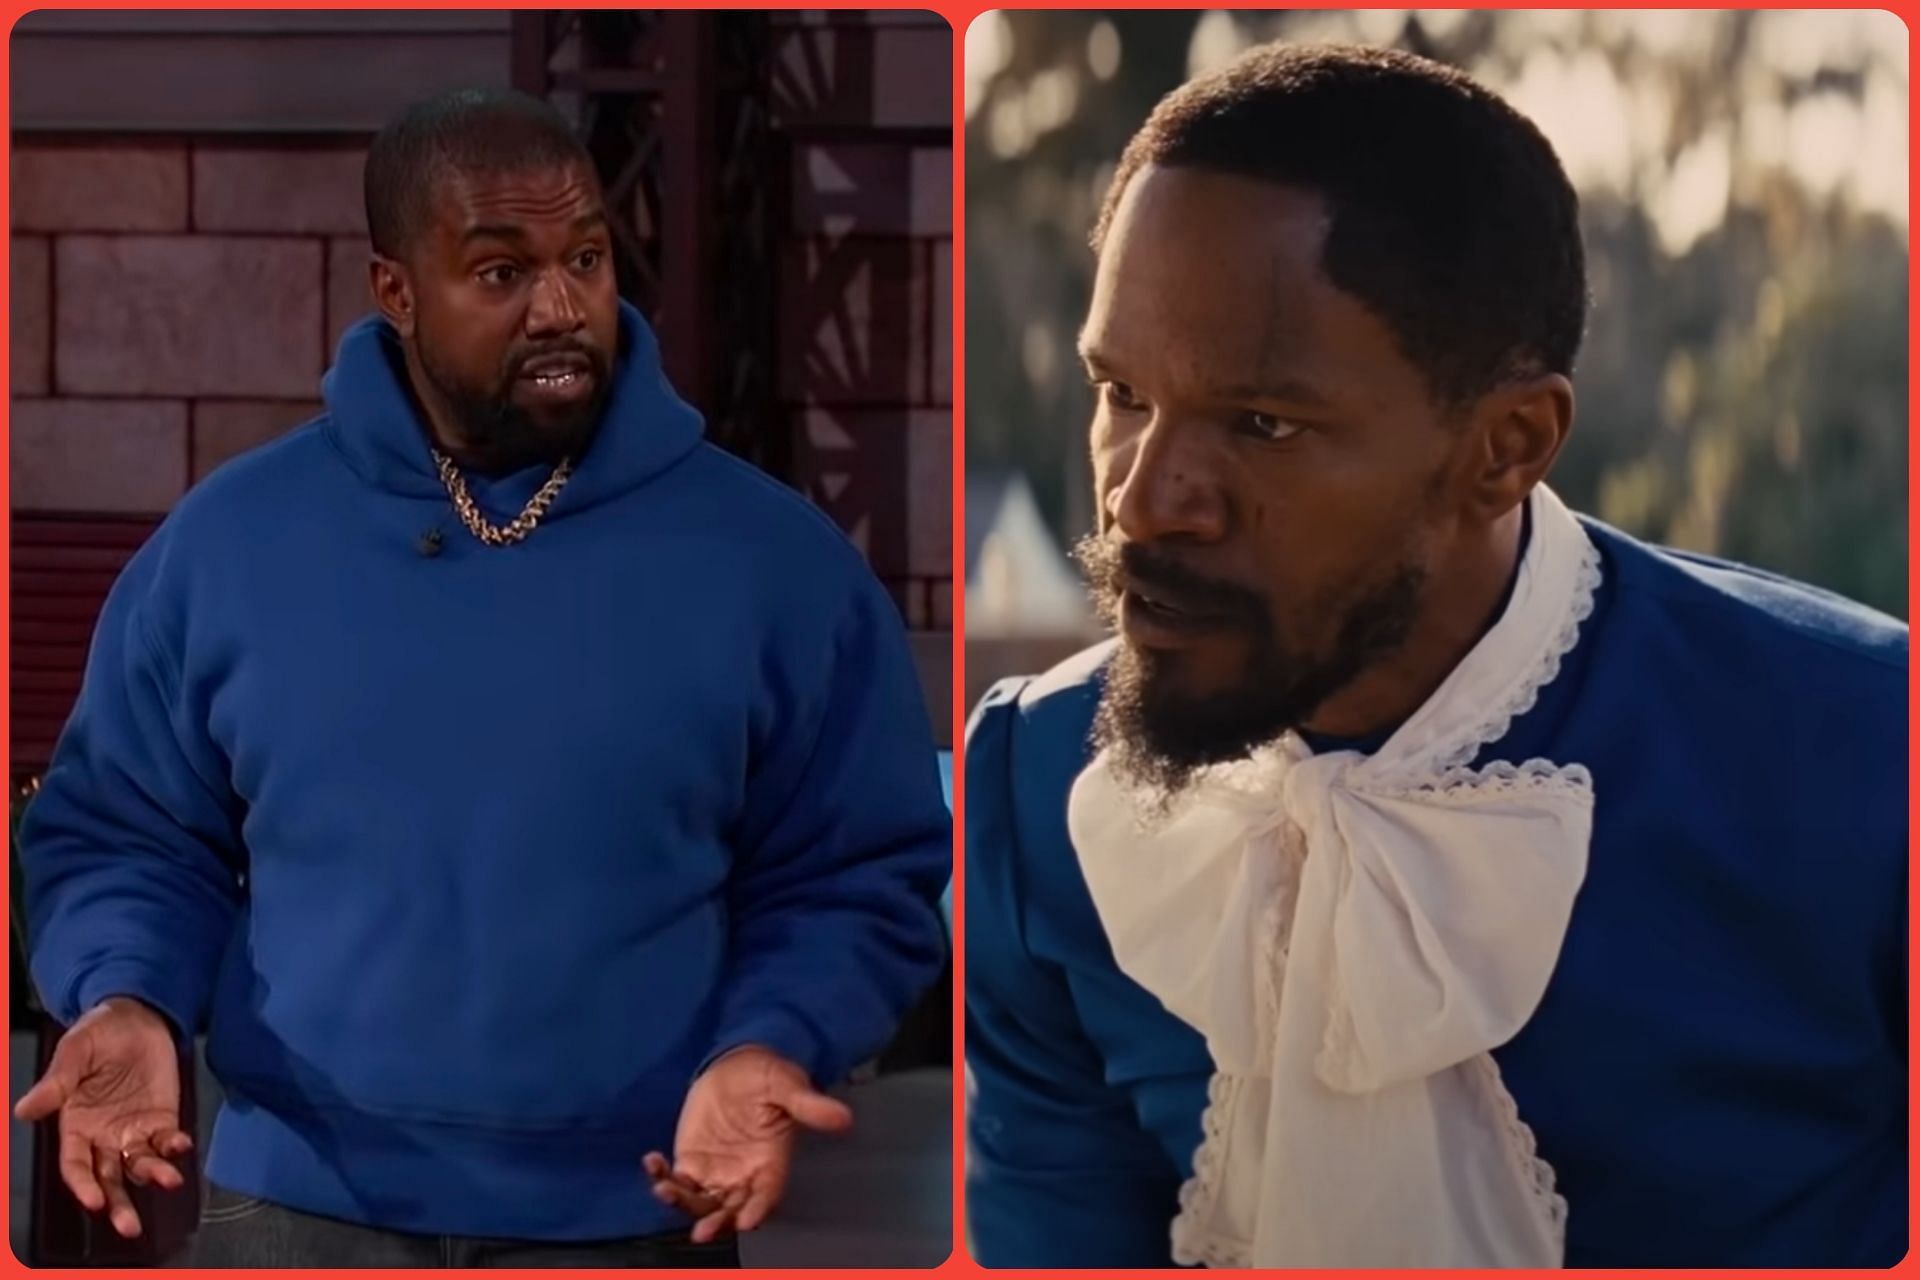 Kanye West claims &lsquo;Django Unchained&rsquo; was his idea (Image via YouTube/Jimmy Kimmel Live and Sony Pictures Entertainment)